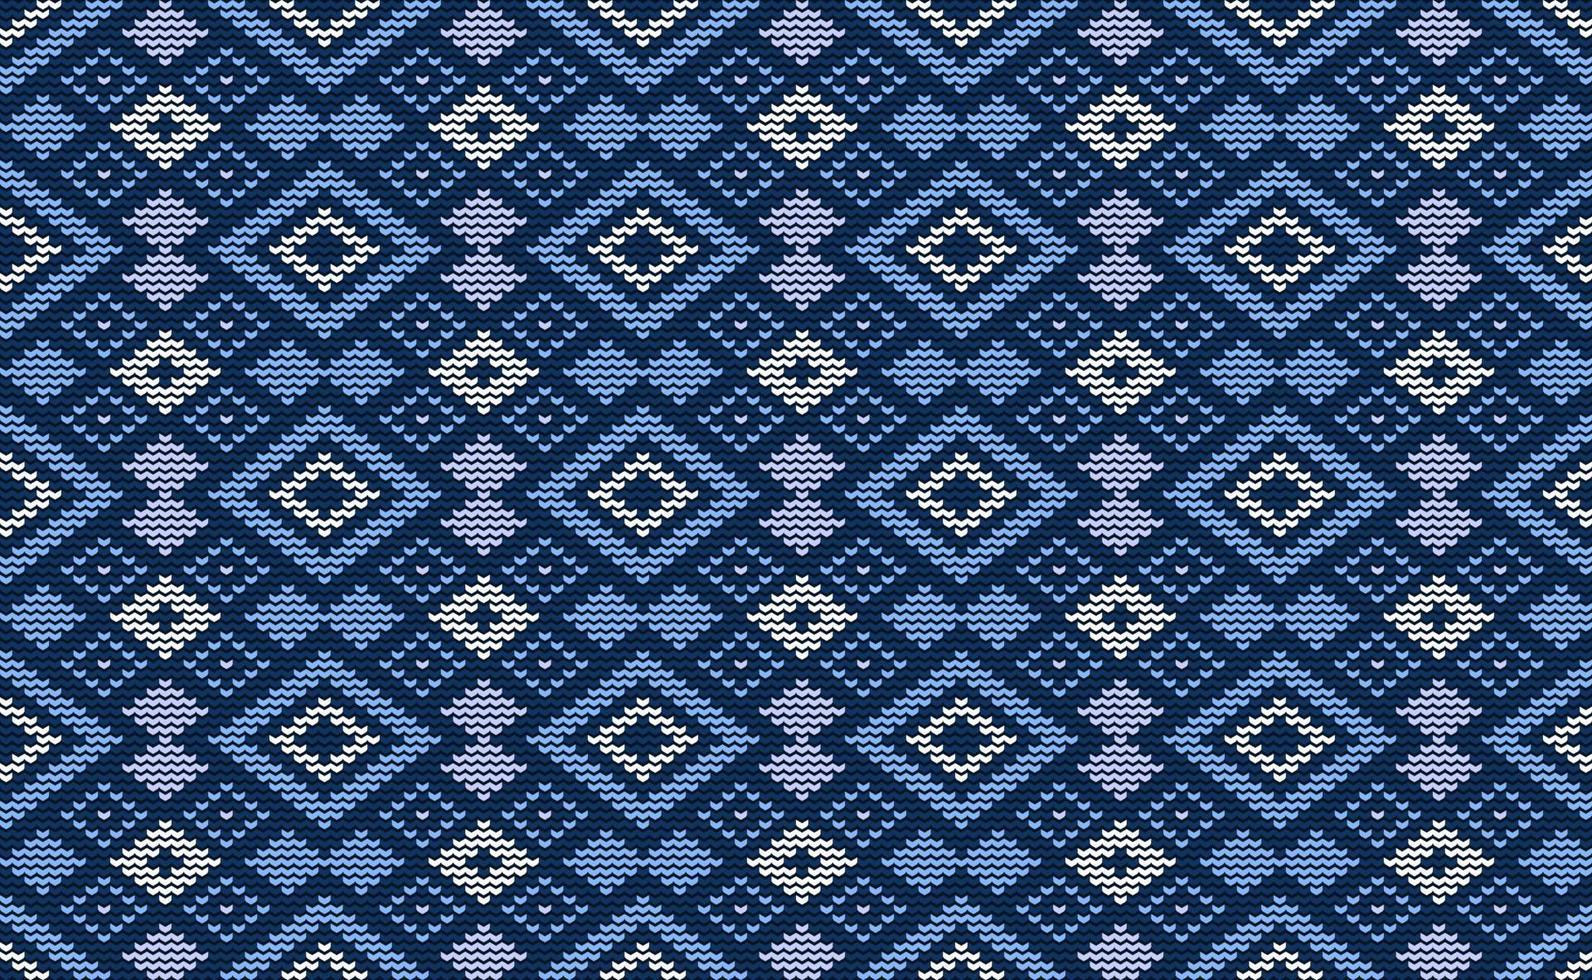 Blue and Purple Knitted Pattern Vector, Rhombus Embroidery Diagonal Background, Square Ikat Repeat retro vector